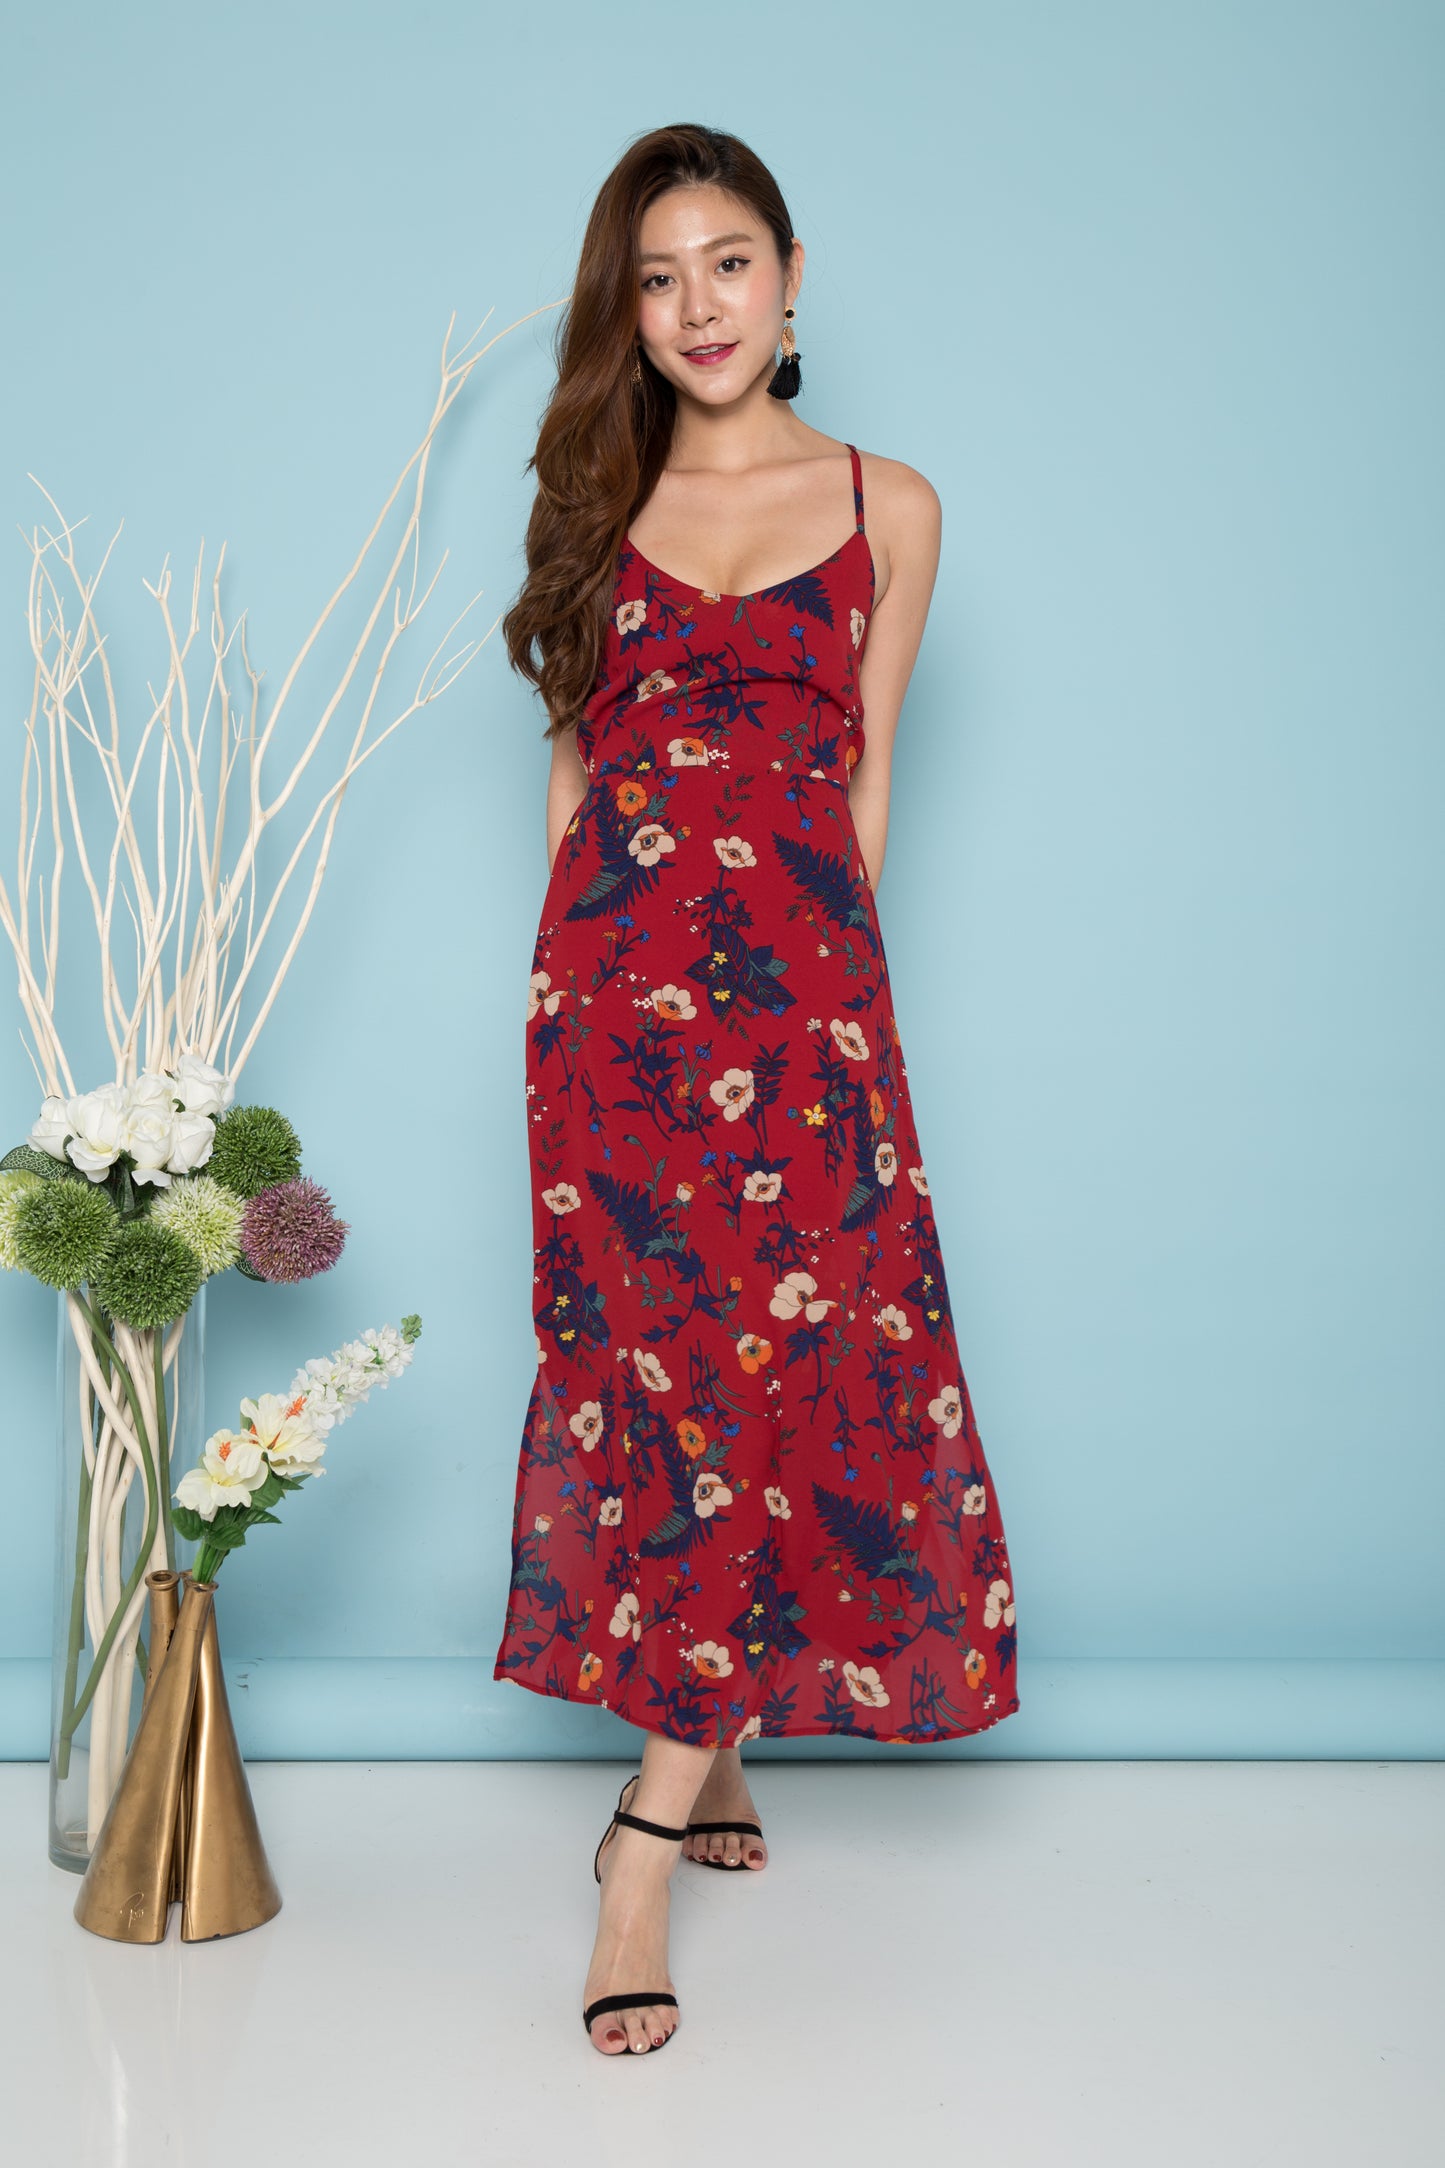 LUXE - Charleigh Floral Maxi Dress in Burgundy